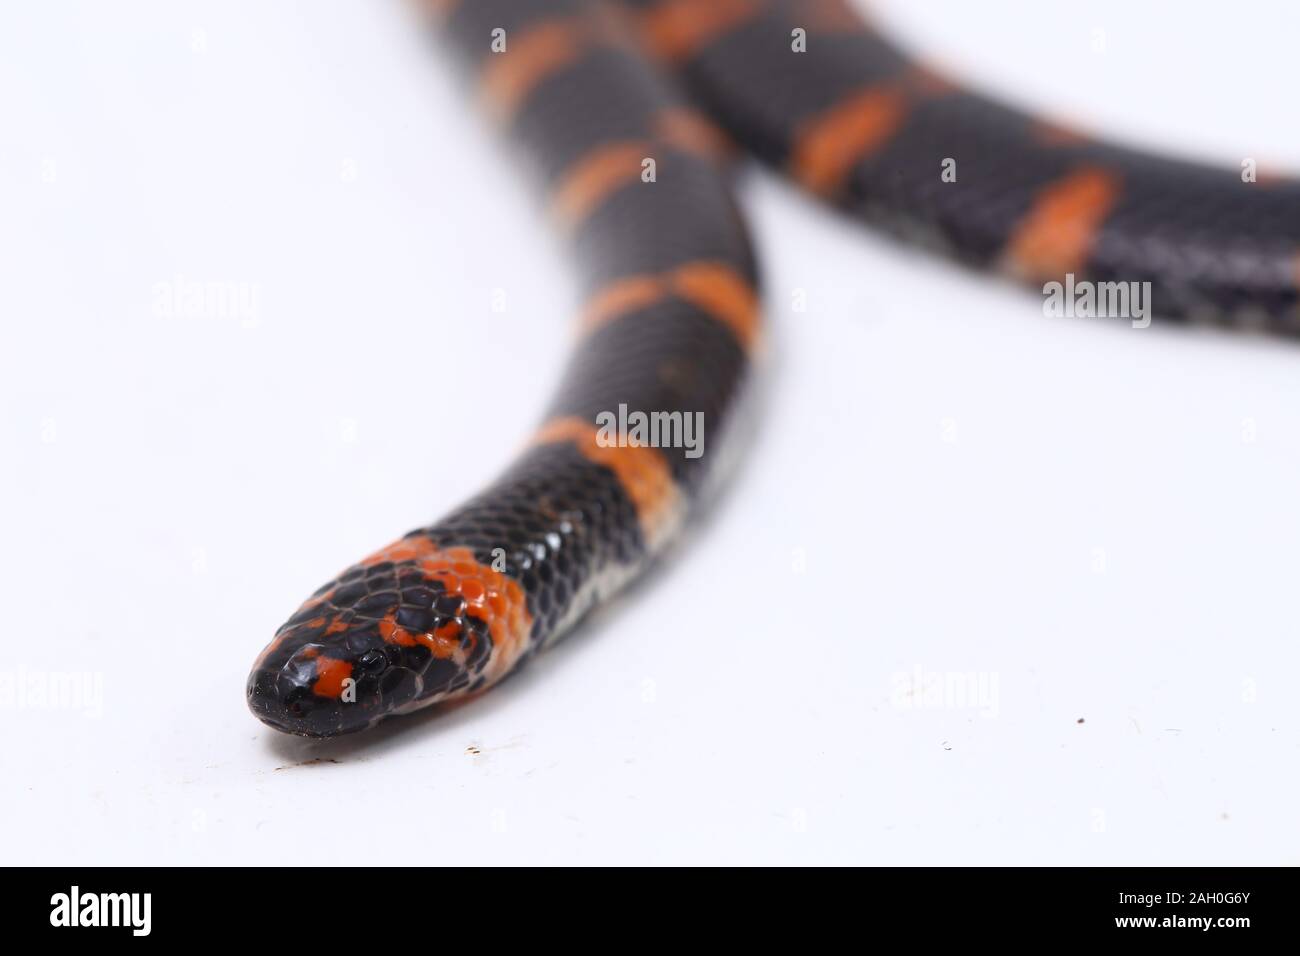 https://c8.alamy.com/comp/2AH0G6Y/red-tailed-pipe-snake-scientific-name-cylindrophis-ruffus-isolate-on-white-background-2AH0G6Y.jpg